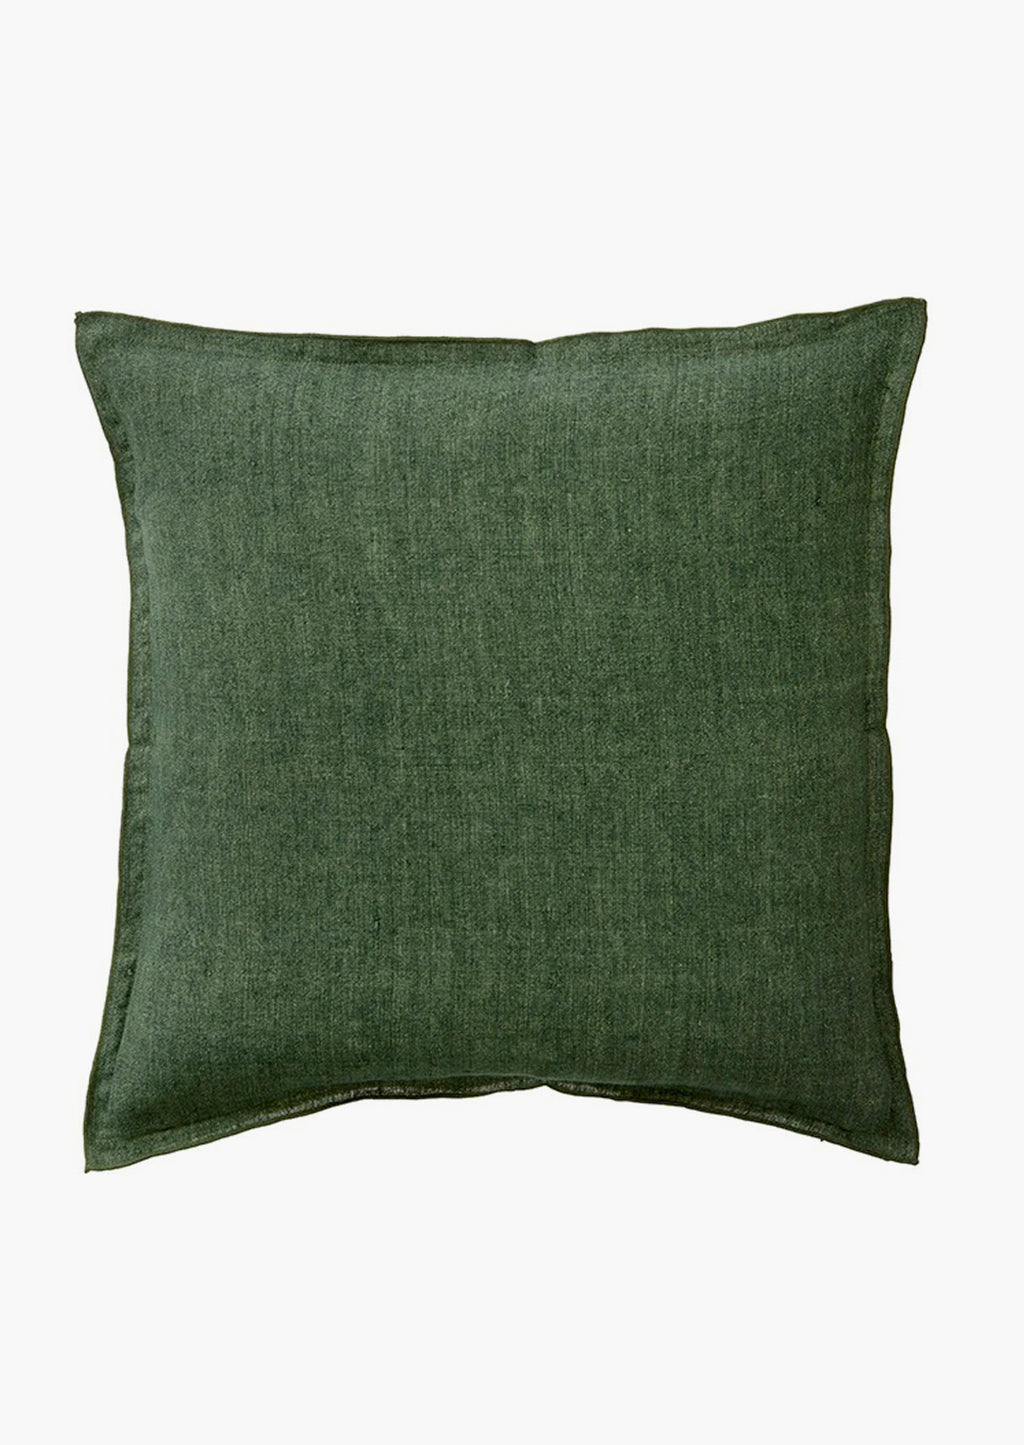 Thyme: A solid linen pillow in thyme green.